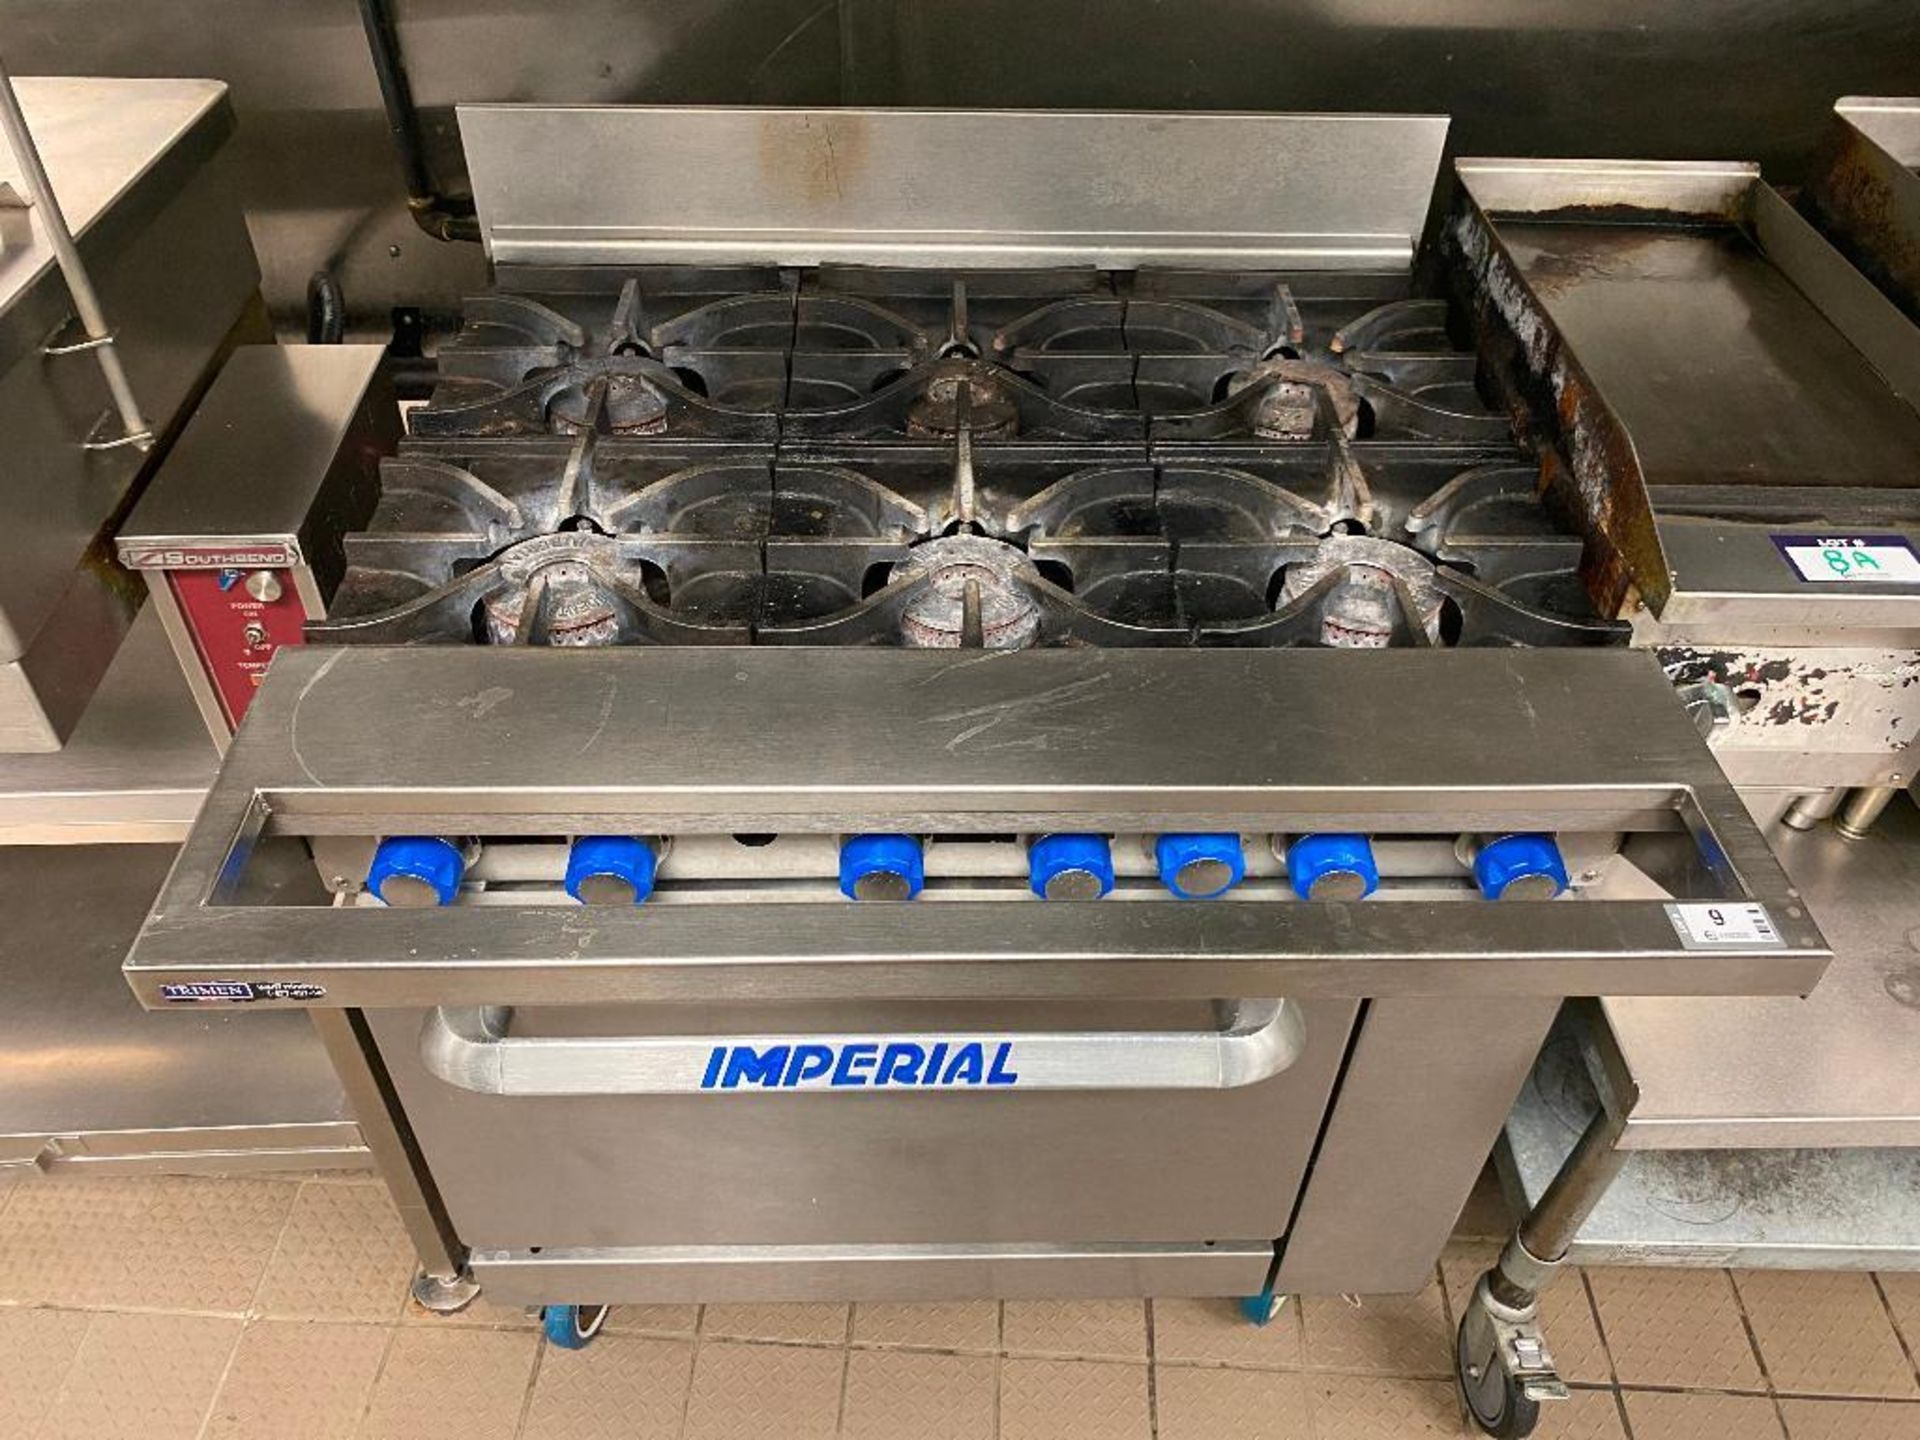 IMPERIAL 6 BURNER RANGE - NOTE: REQUIRES DISCONNECT, PLEASE INSPECT - Image 3 of 5